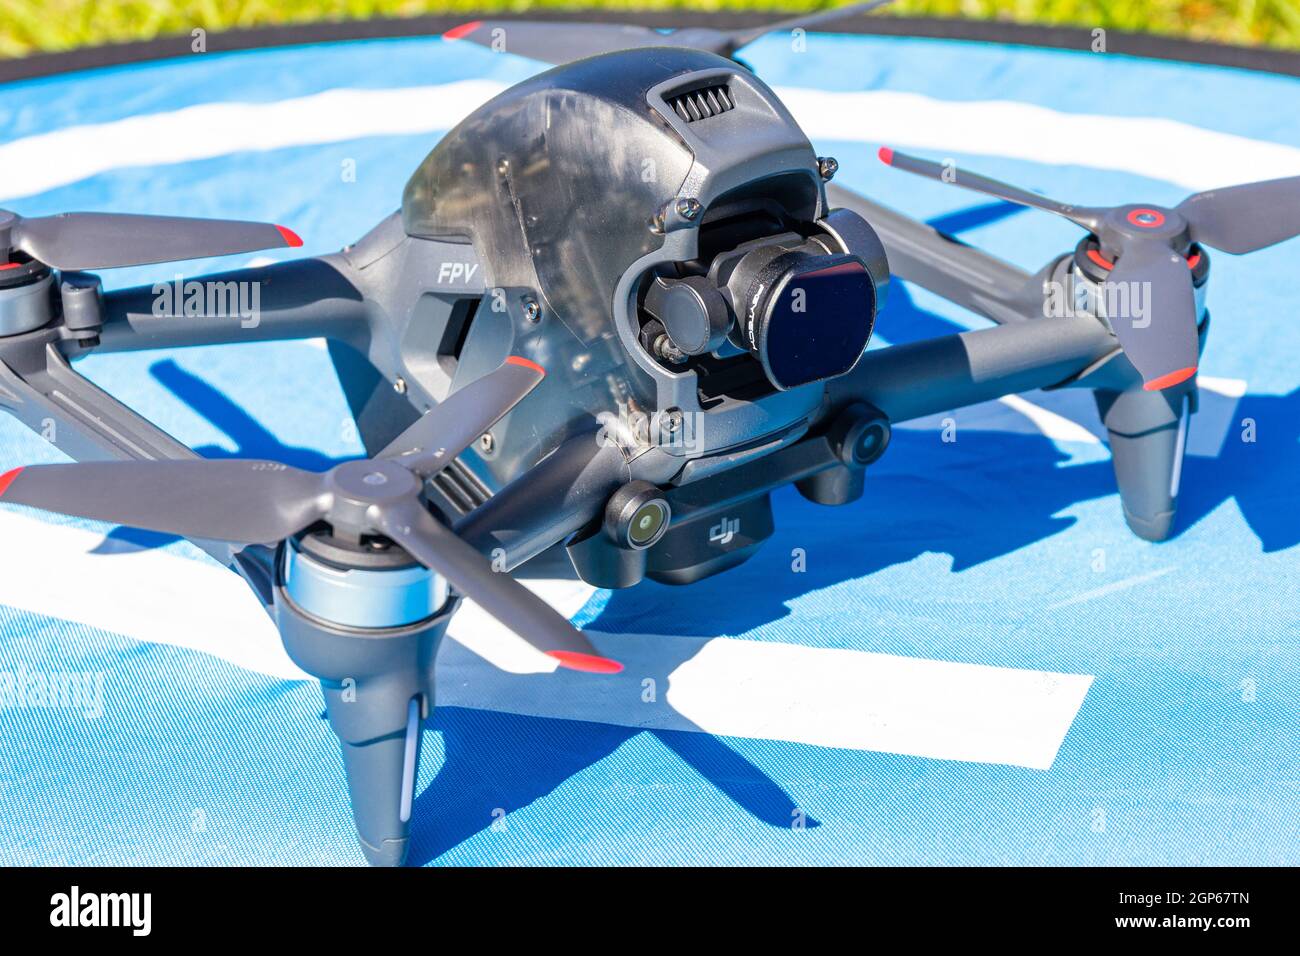 Moscow Russia - 30 may 2021: Close-up picture new aerial DJI FPV drone on fly landing pad. Top front view uav quad copter with 4K 60 fps Digital Camer Stock Photo